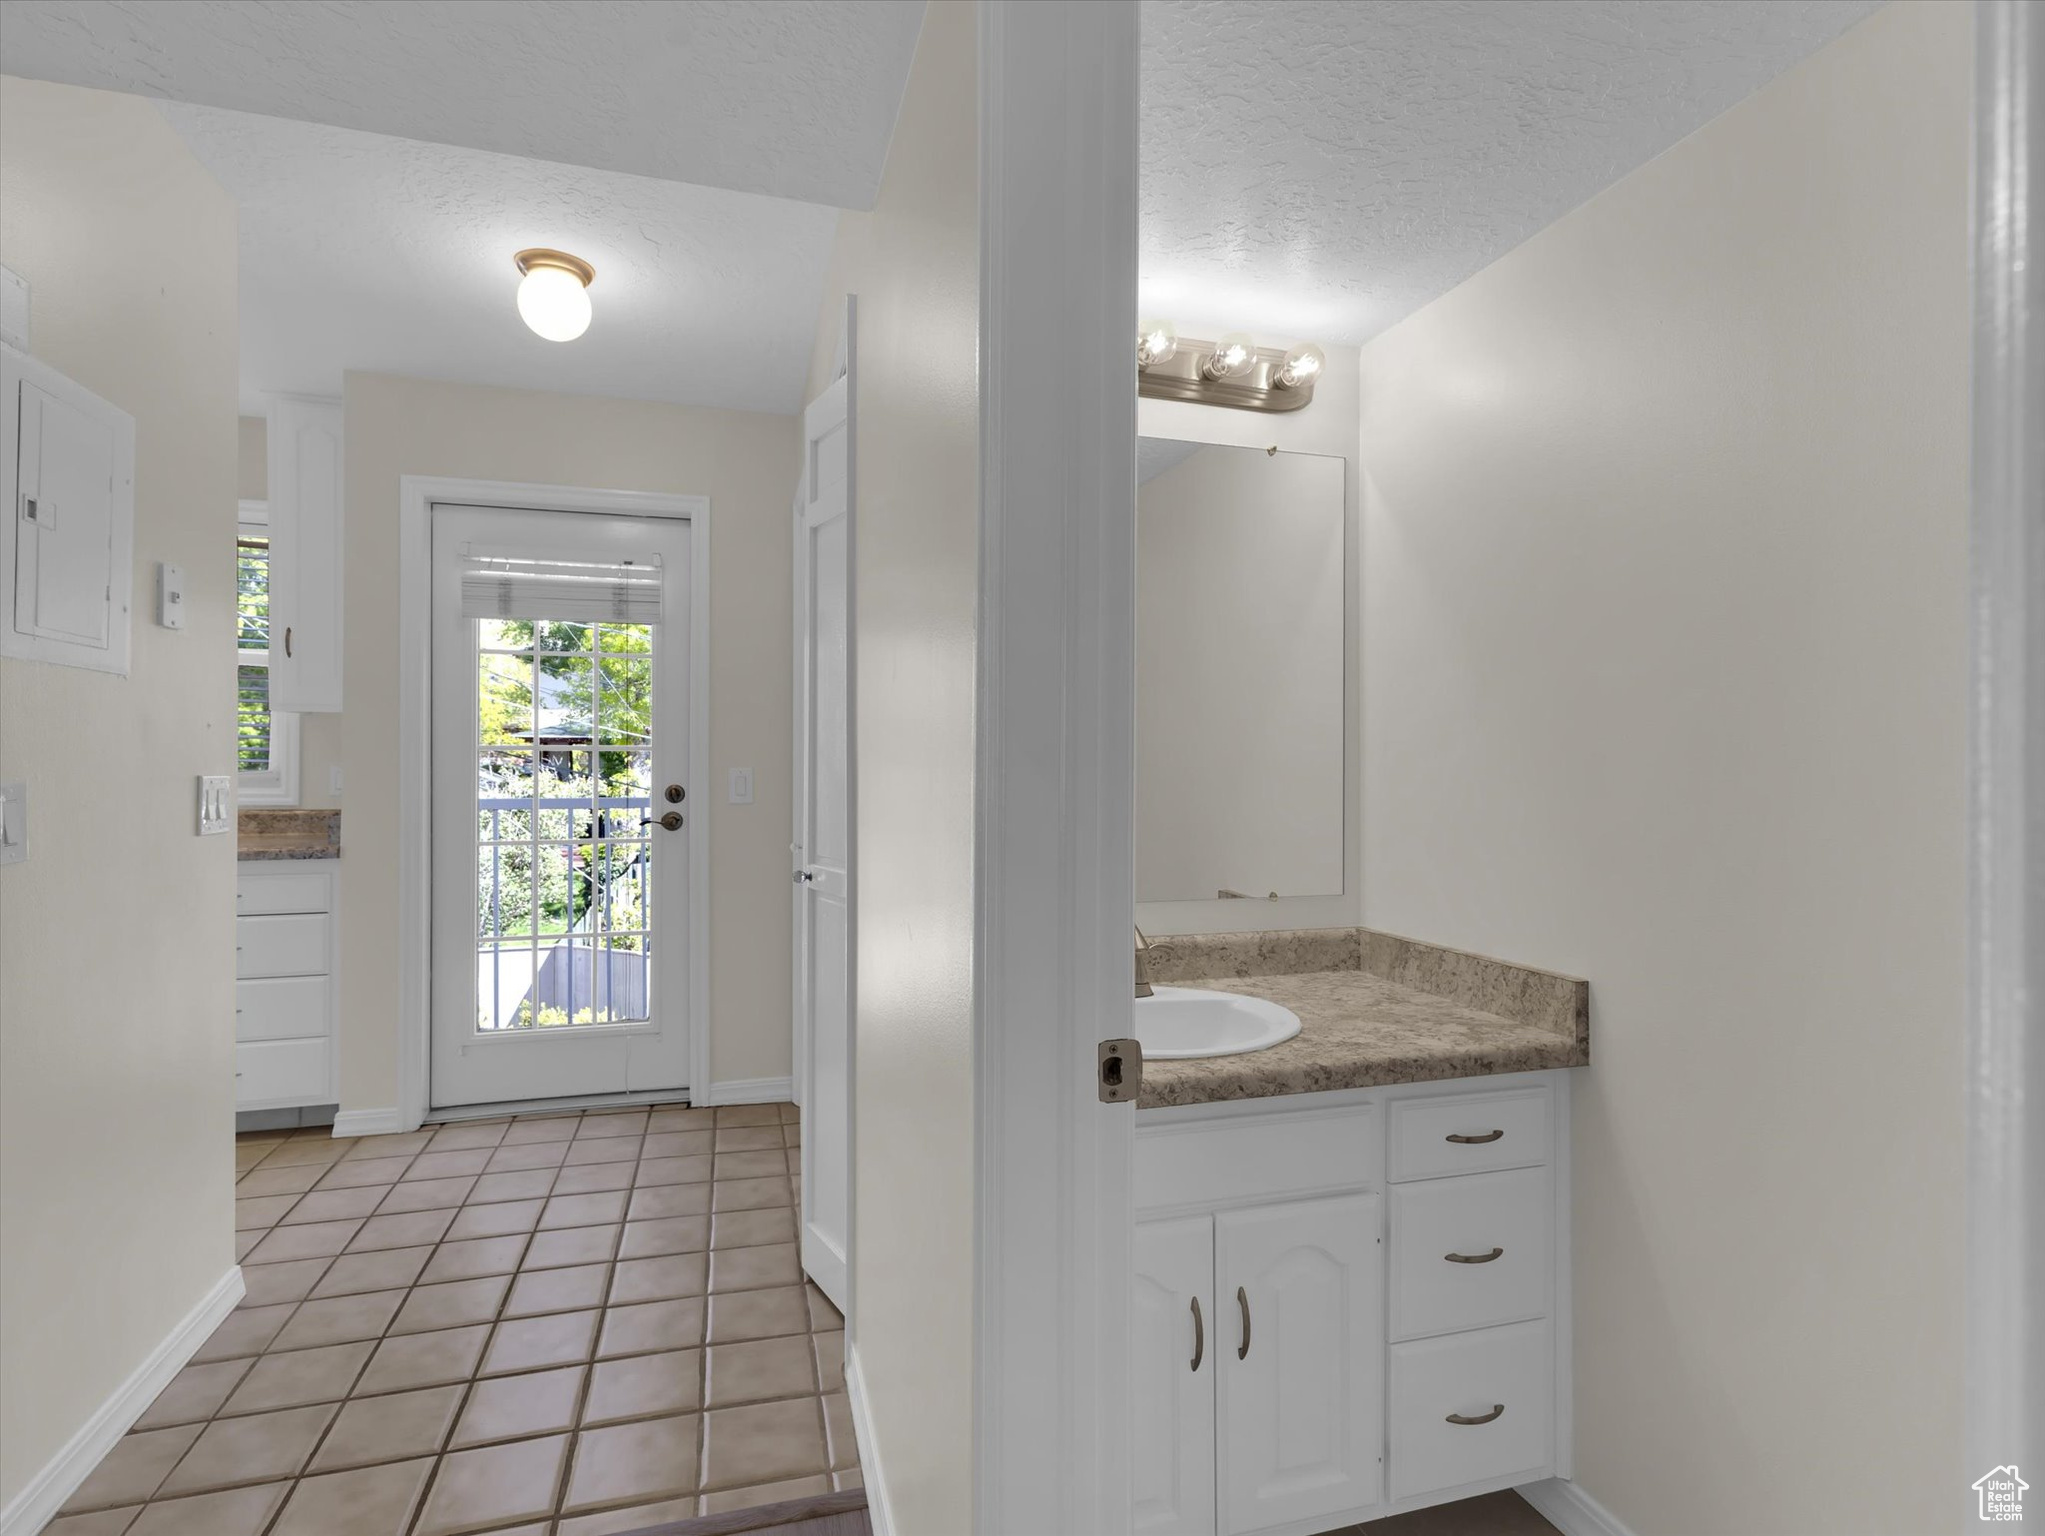 Bathroom featuring tile flooring, a textured ceiling, and large vanity